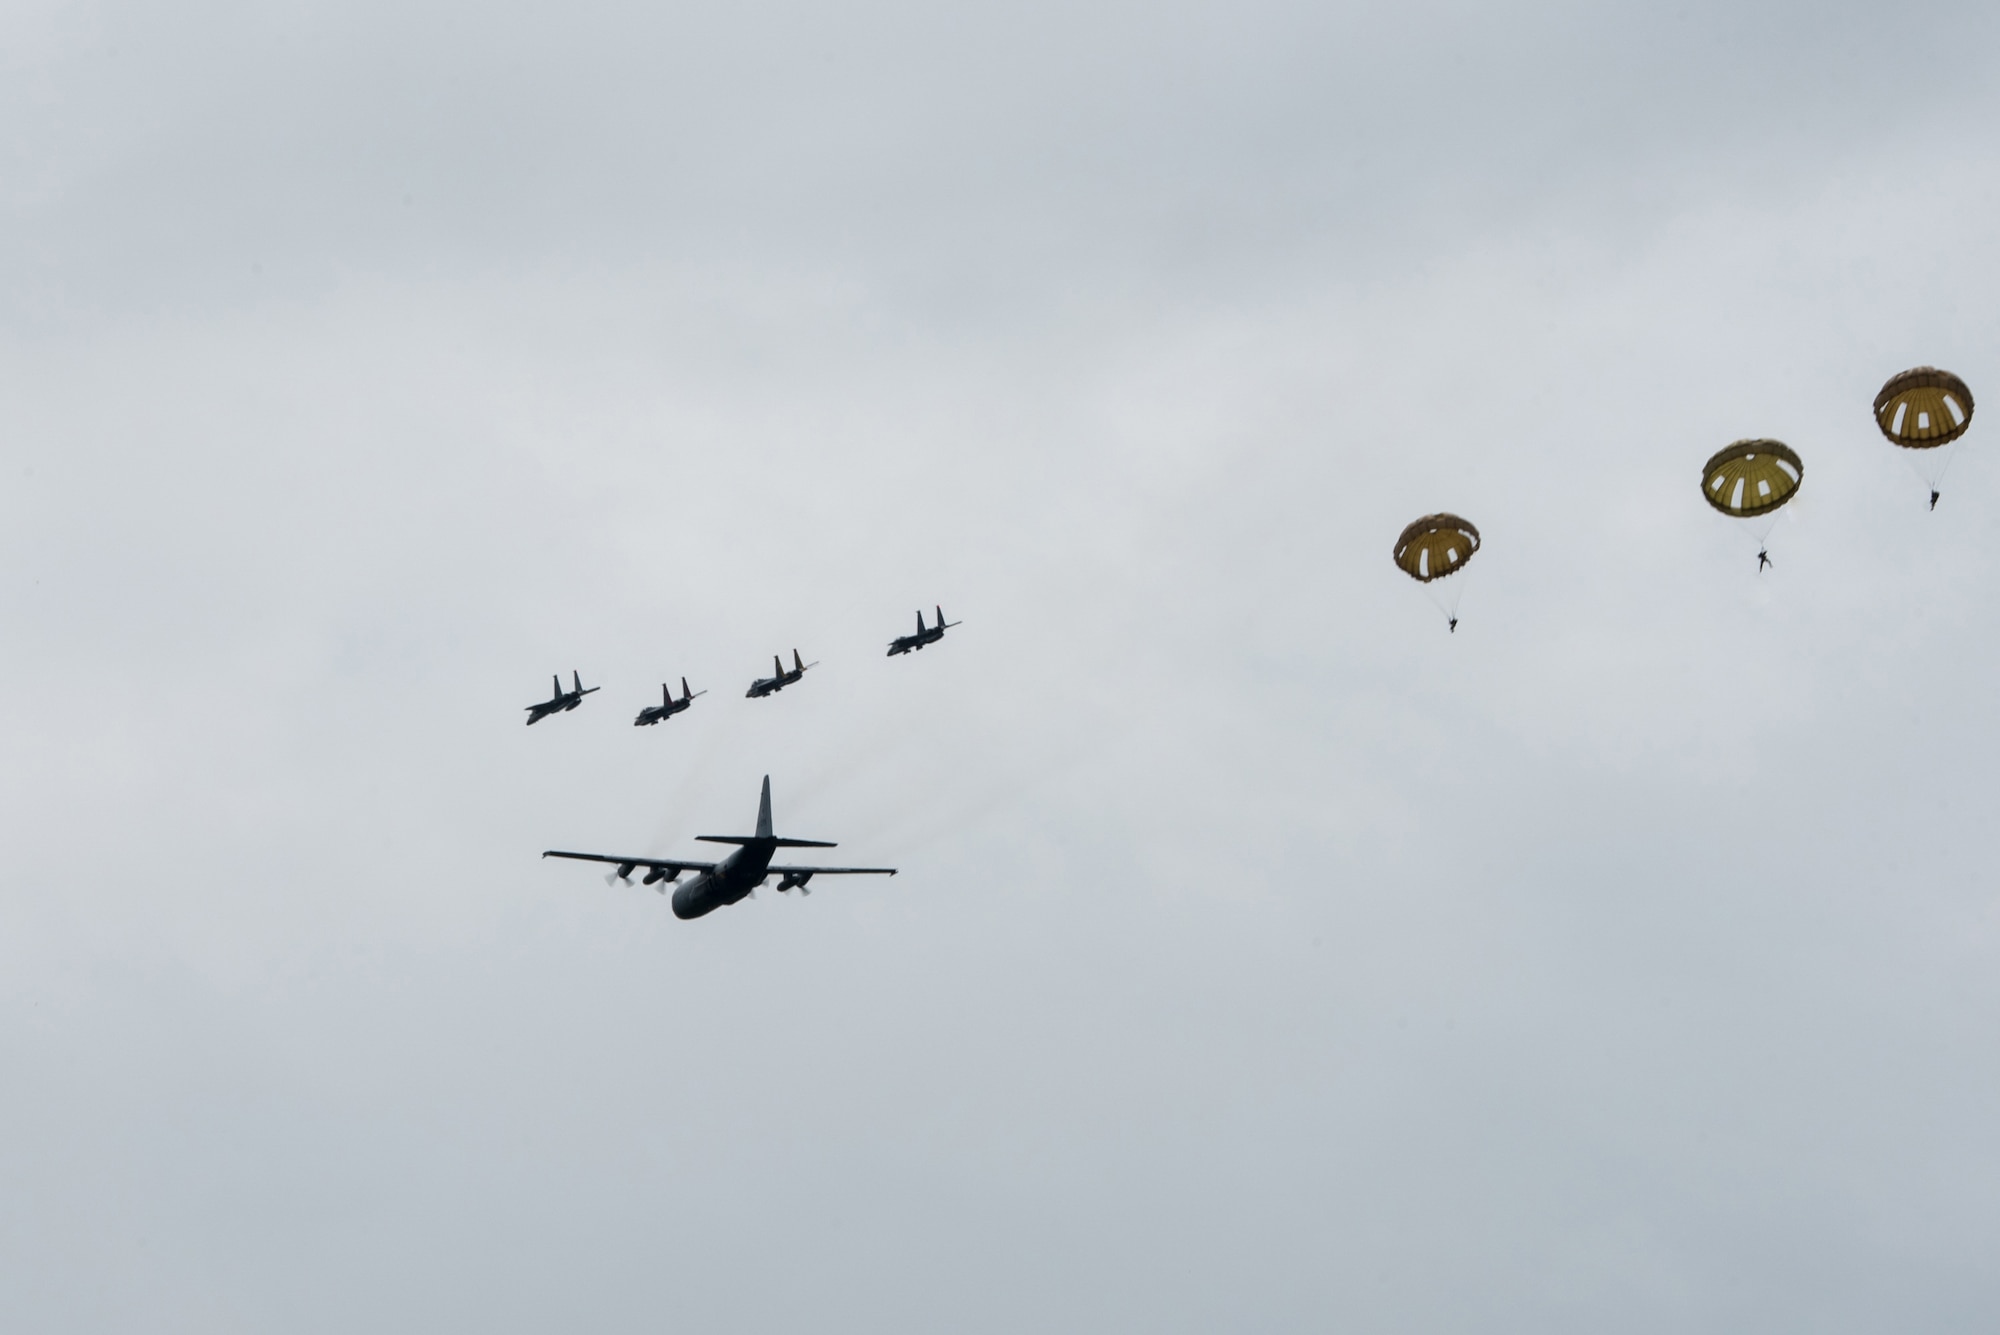 A C-130 Hercules aircraft flies over Sainte-Mère-Église, France, June 9, 2019, as part of the 75th-anniversary commemoration of D-Day. The Commemorative Airborne Operations event included nearly 1,000 paratroopers from Belgium, France, Germany, The Netherlands, Poland, Romania and the United Kingdom; and members of the Kentucky Air National Guard, U.S. Special Operations Command Europe, United States Army Civil Affairs and Psychological Operations Command, 18th Airborne Corps, 75th Ranger Regiment, 82nd Airborne Division, 173rd Airborne Brigade, 503rd Military Police Battalion, 509th Infantry Regiment, 4th Brigade Combat Team (Airborne), 25th Infantry Division, and U.S. Air Forces Europe. D-Day remains a historic reminder of how the dedicated resolve of allies with a common purpose and shared vision builds proven partnerships that endure. (U.S. Air National Guard photo by Phil Speck)